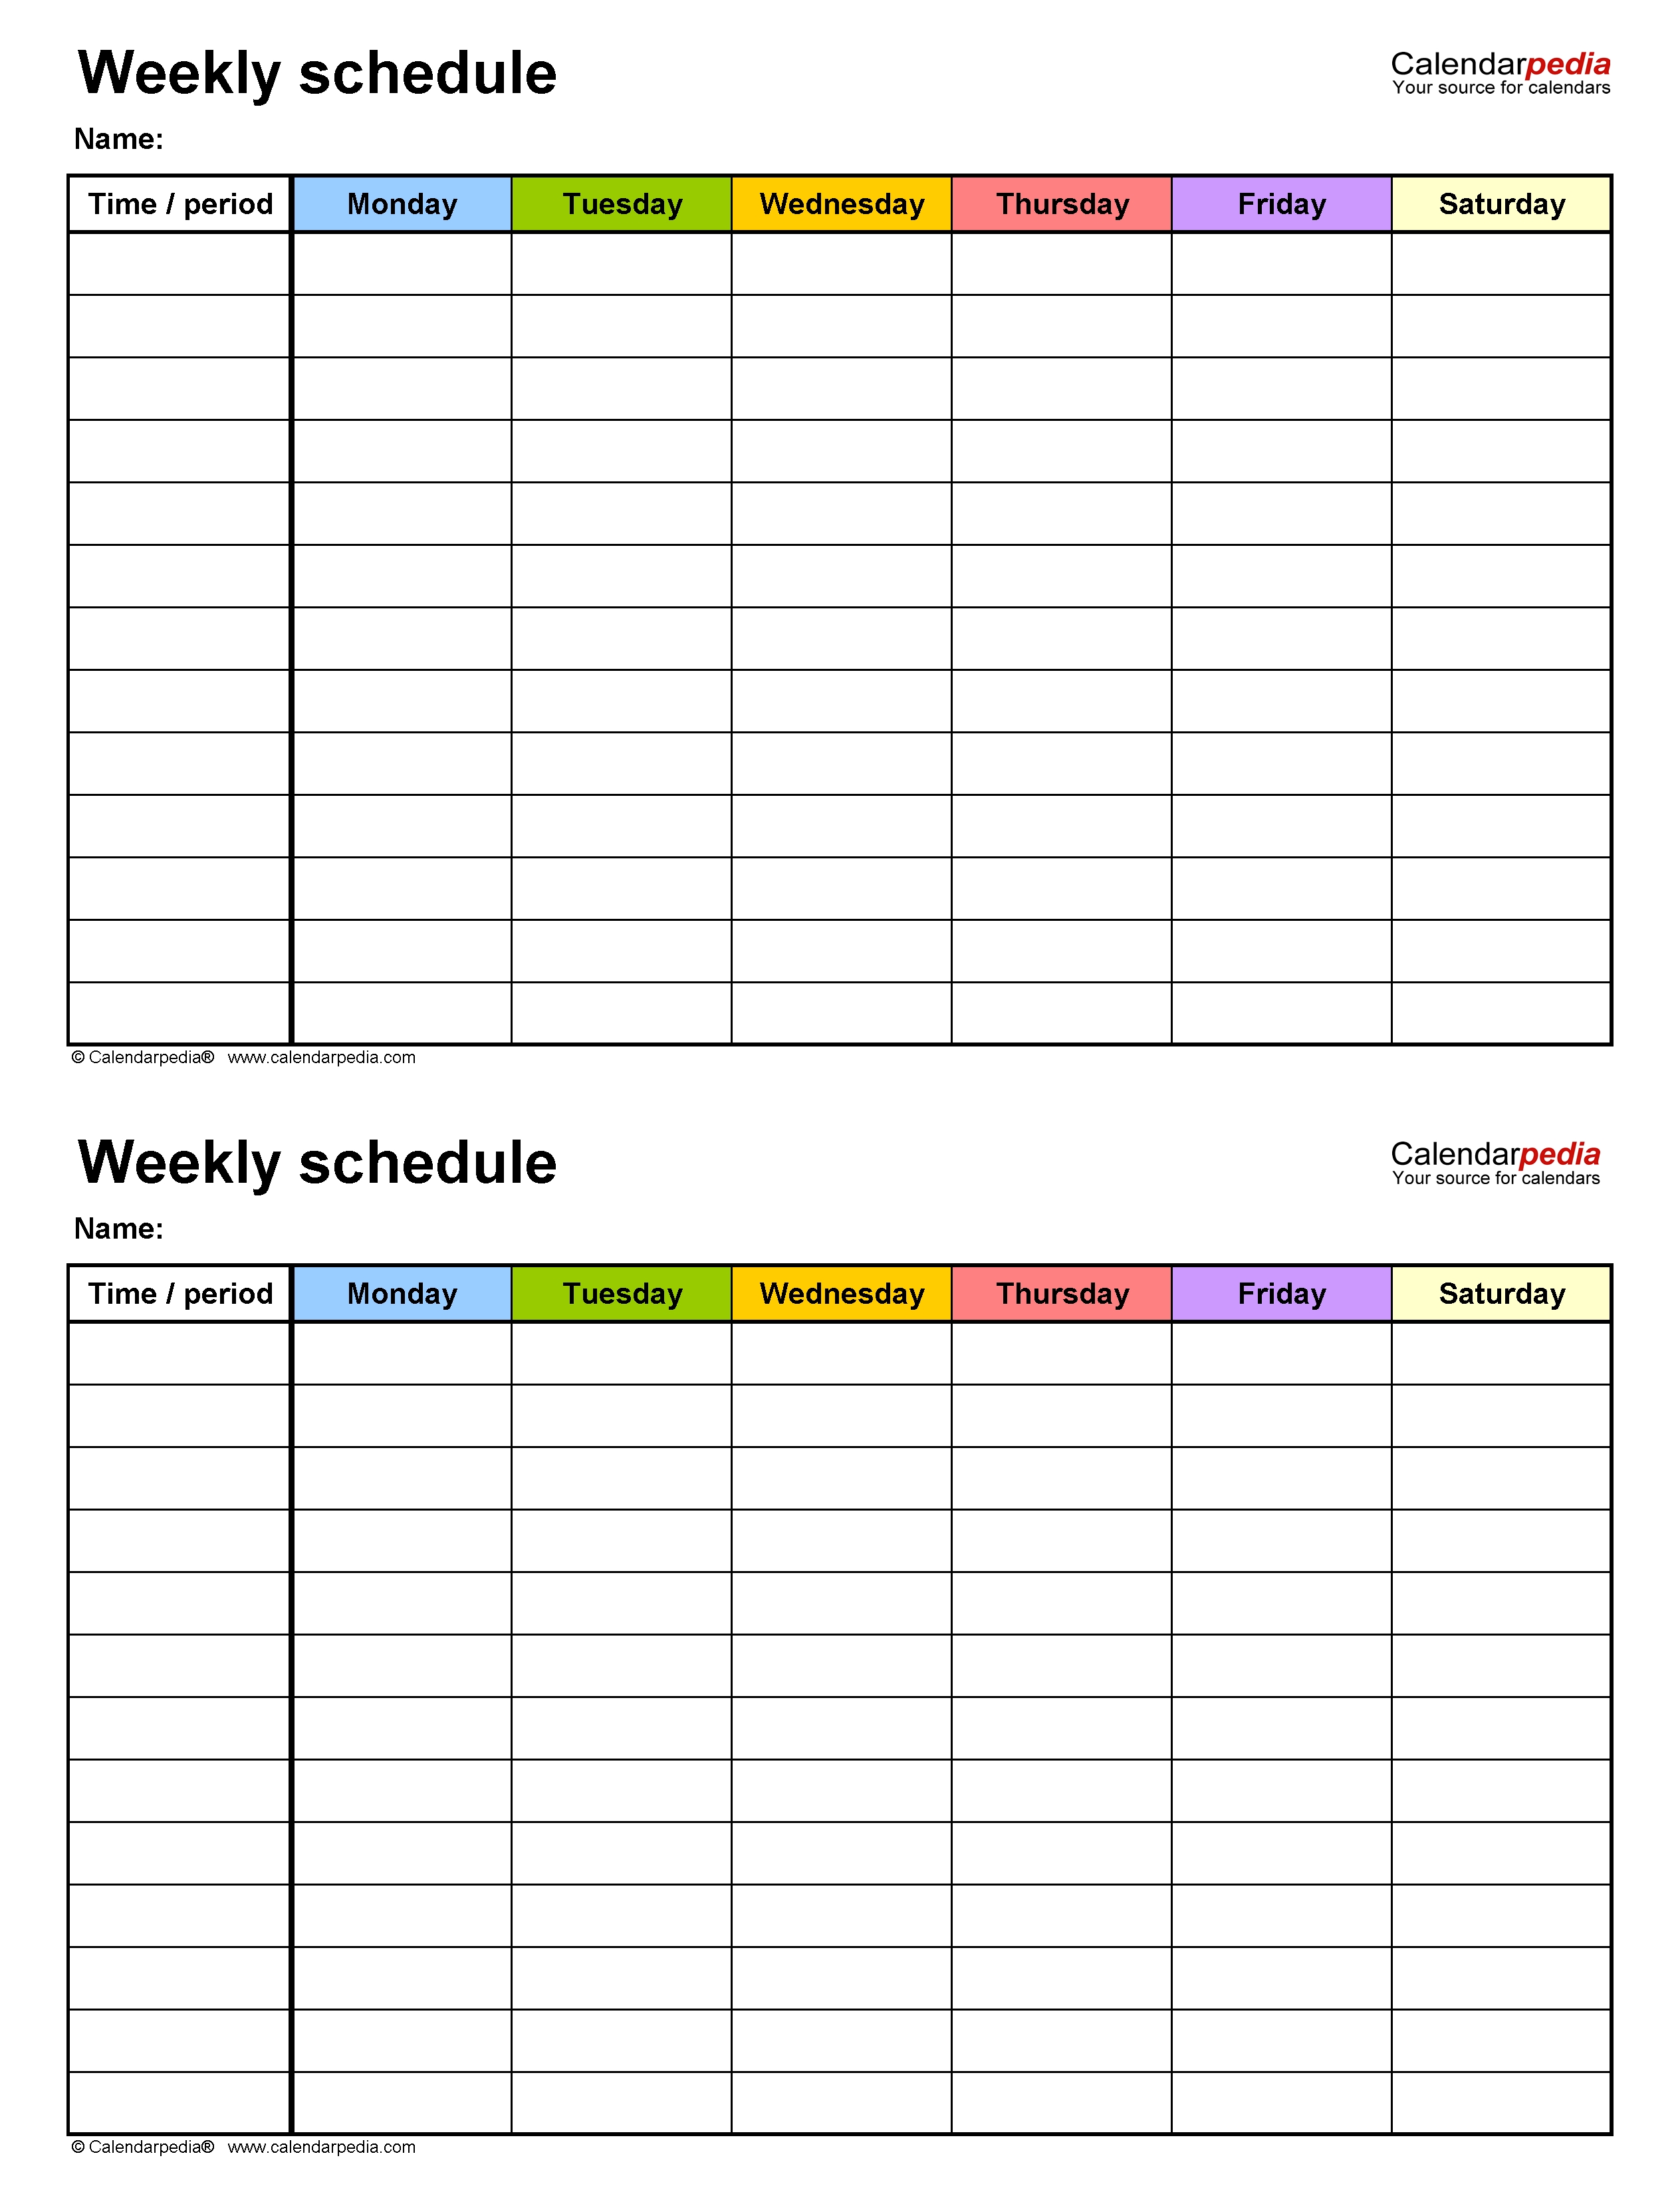 Free Weekly Schedule Templates For Excel - 18 Templates  Calendar With 6 Day Weeks